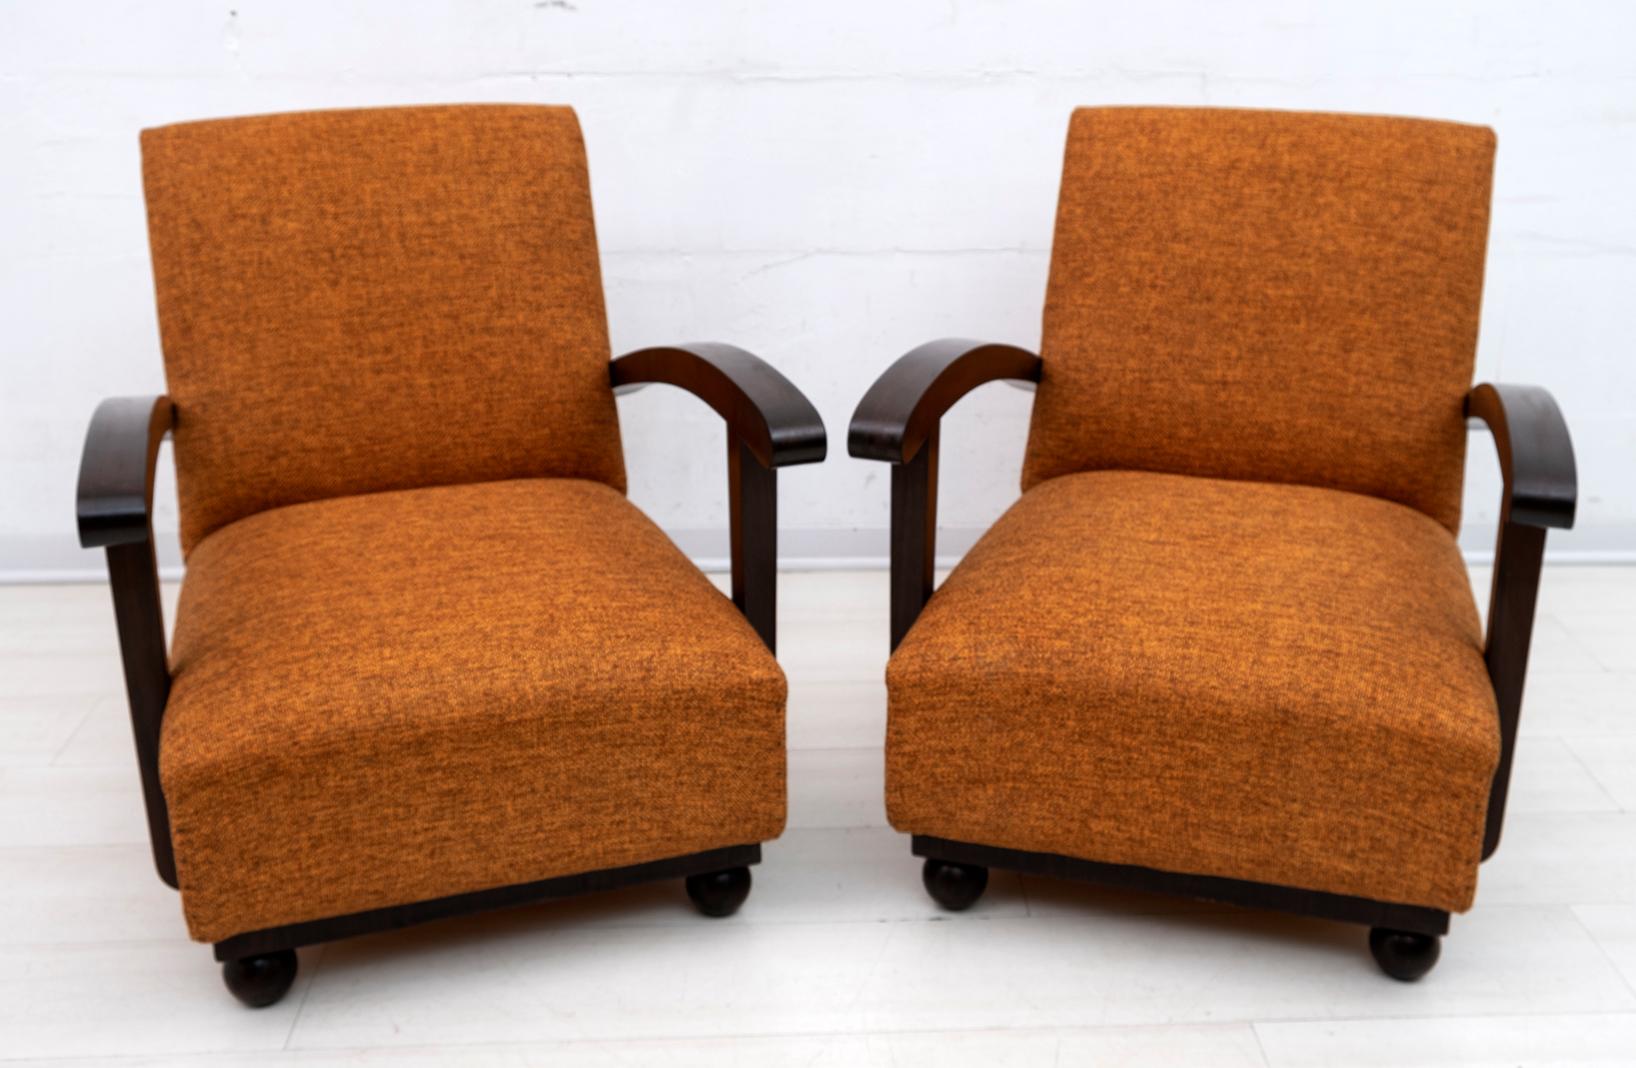 Pair of art deco armchairs in Italian walnut from the early 1900s, 
the armchairs have been restored and upholstered in hemp fabric.